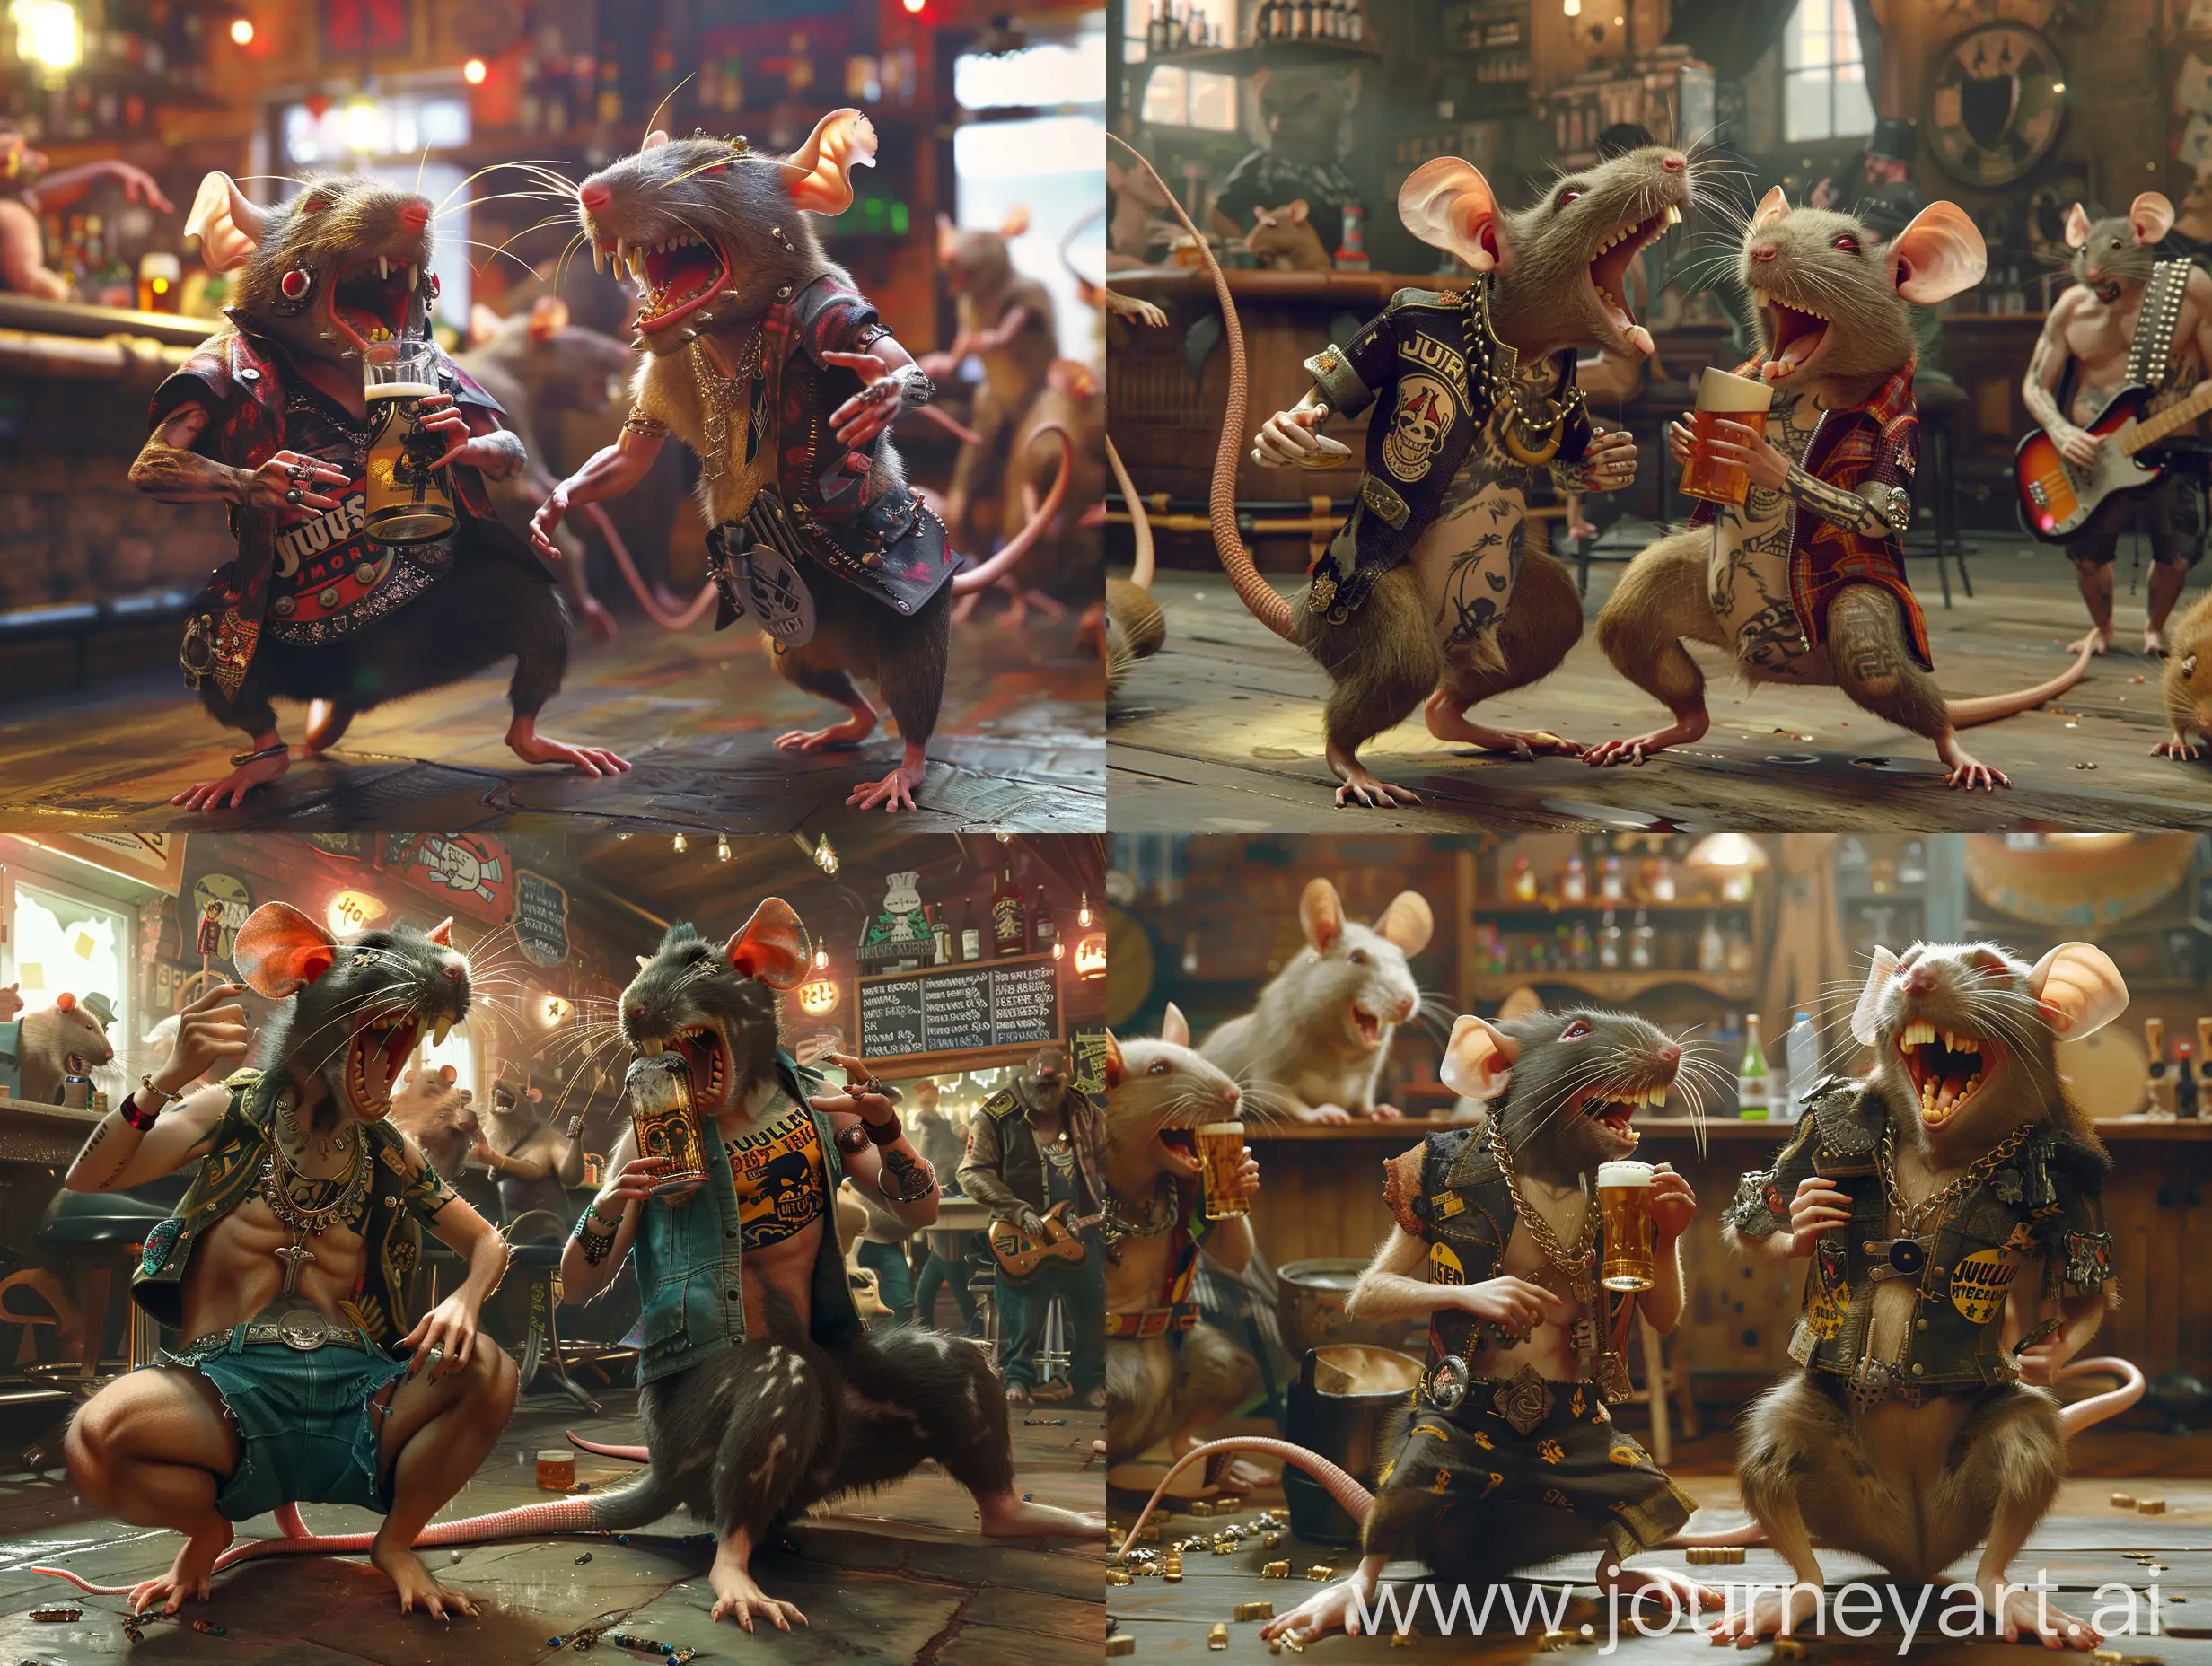 Anthropomorphic-Rats-in-Heavy-Metal-Attire-Enjoying-Beers-in-a-Bar